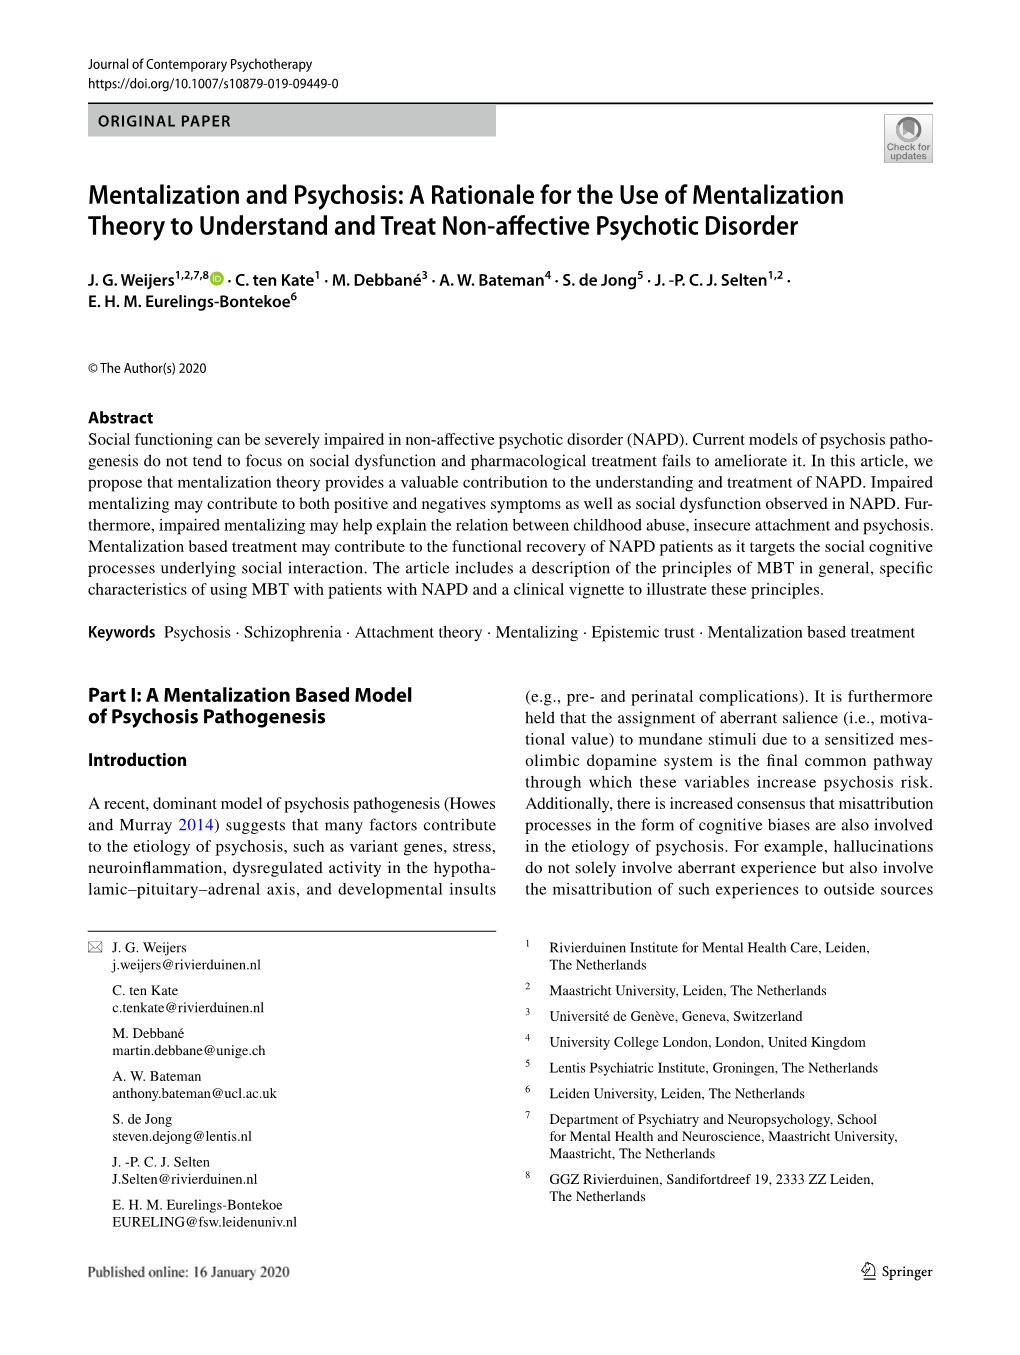 Mentalization and Psychosis: a Rationale for the Use of Mentalization Theory to Understand and Treat Non‑Afective Psychotic Disorder